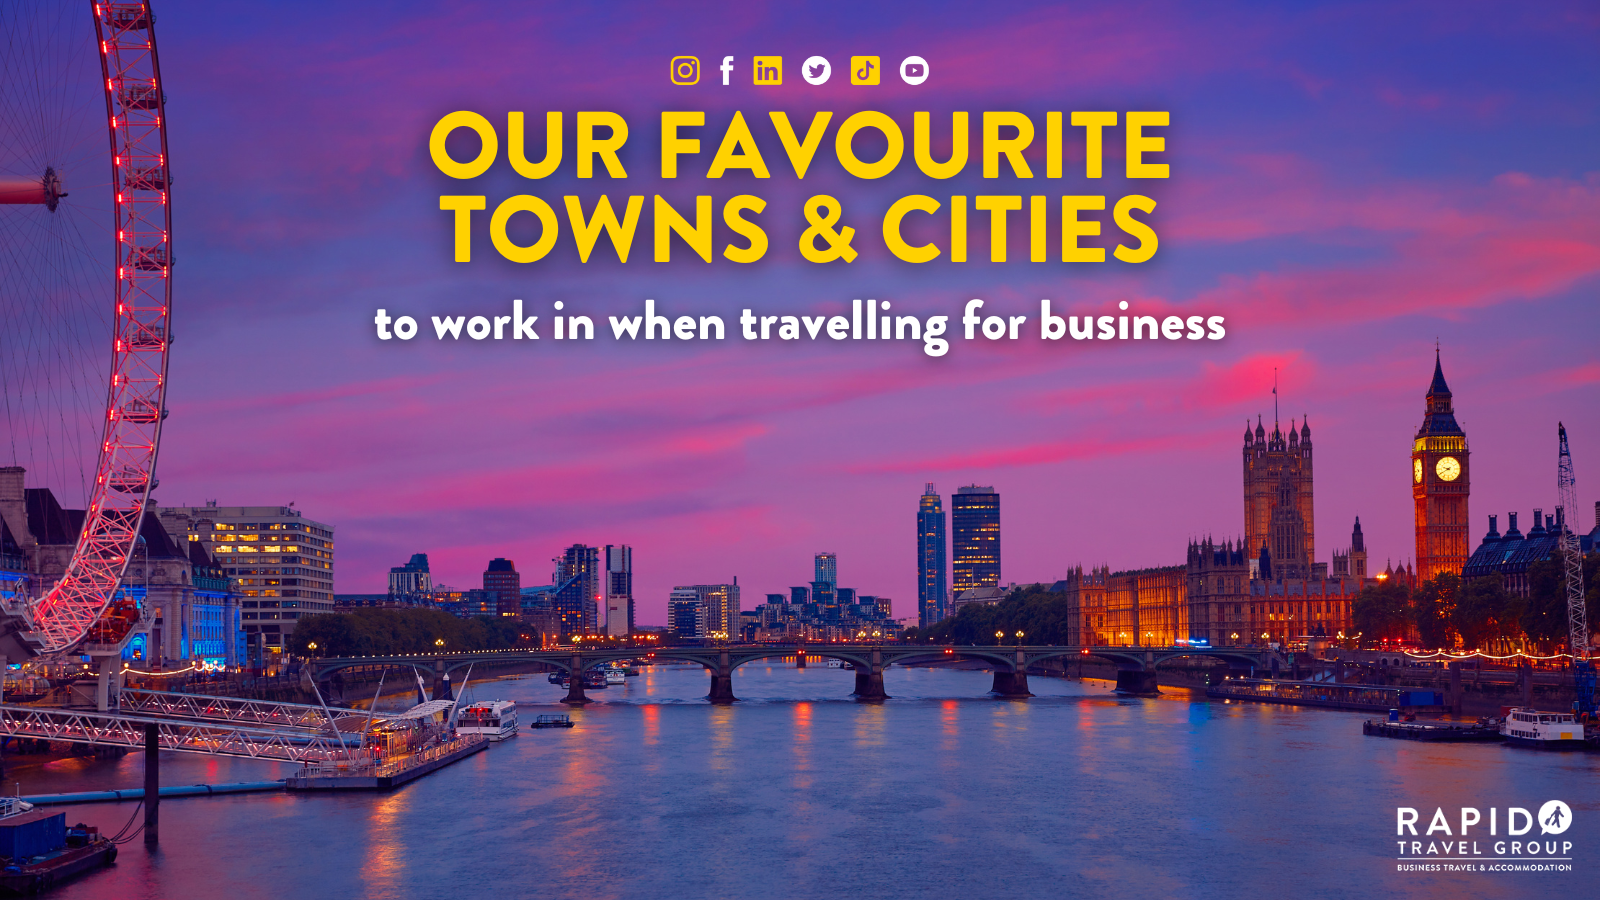 Our favourite towns and cities to work in when travelling for business